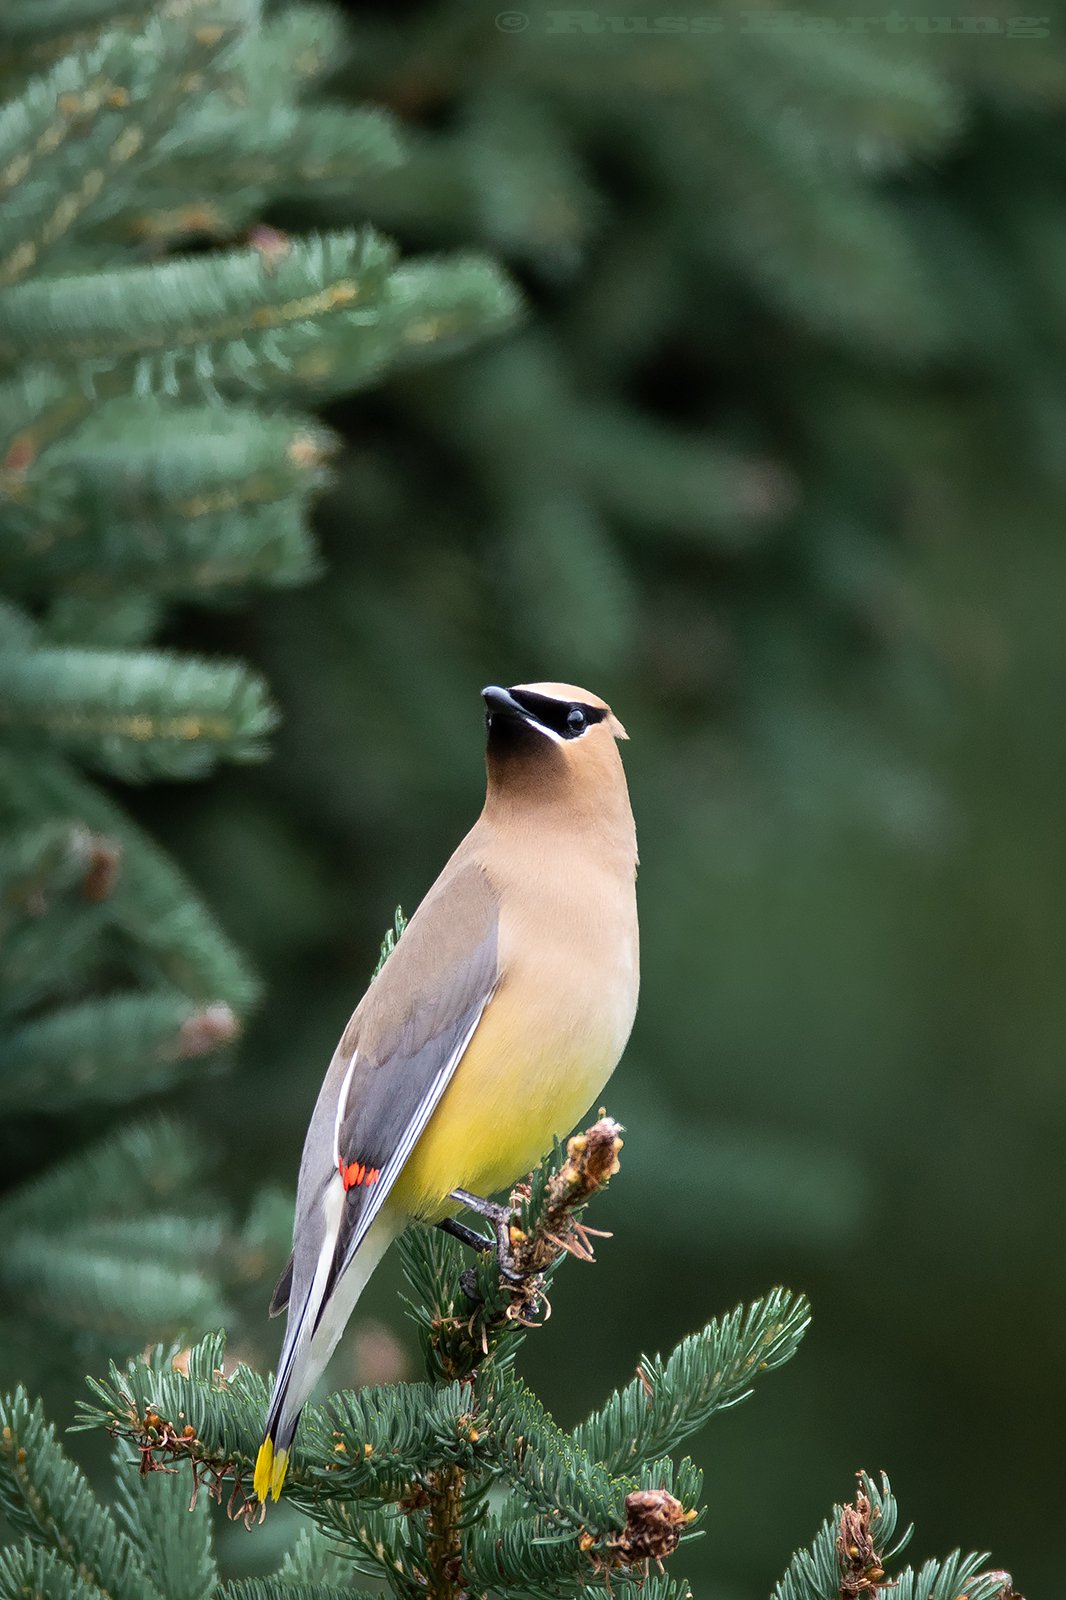 "Cedar Waxwing" - Published in Adirondack Life Magazine, September/October issue 2019